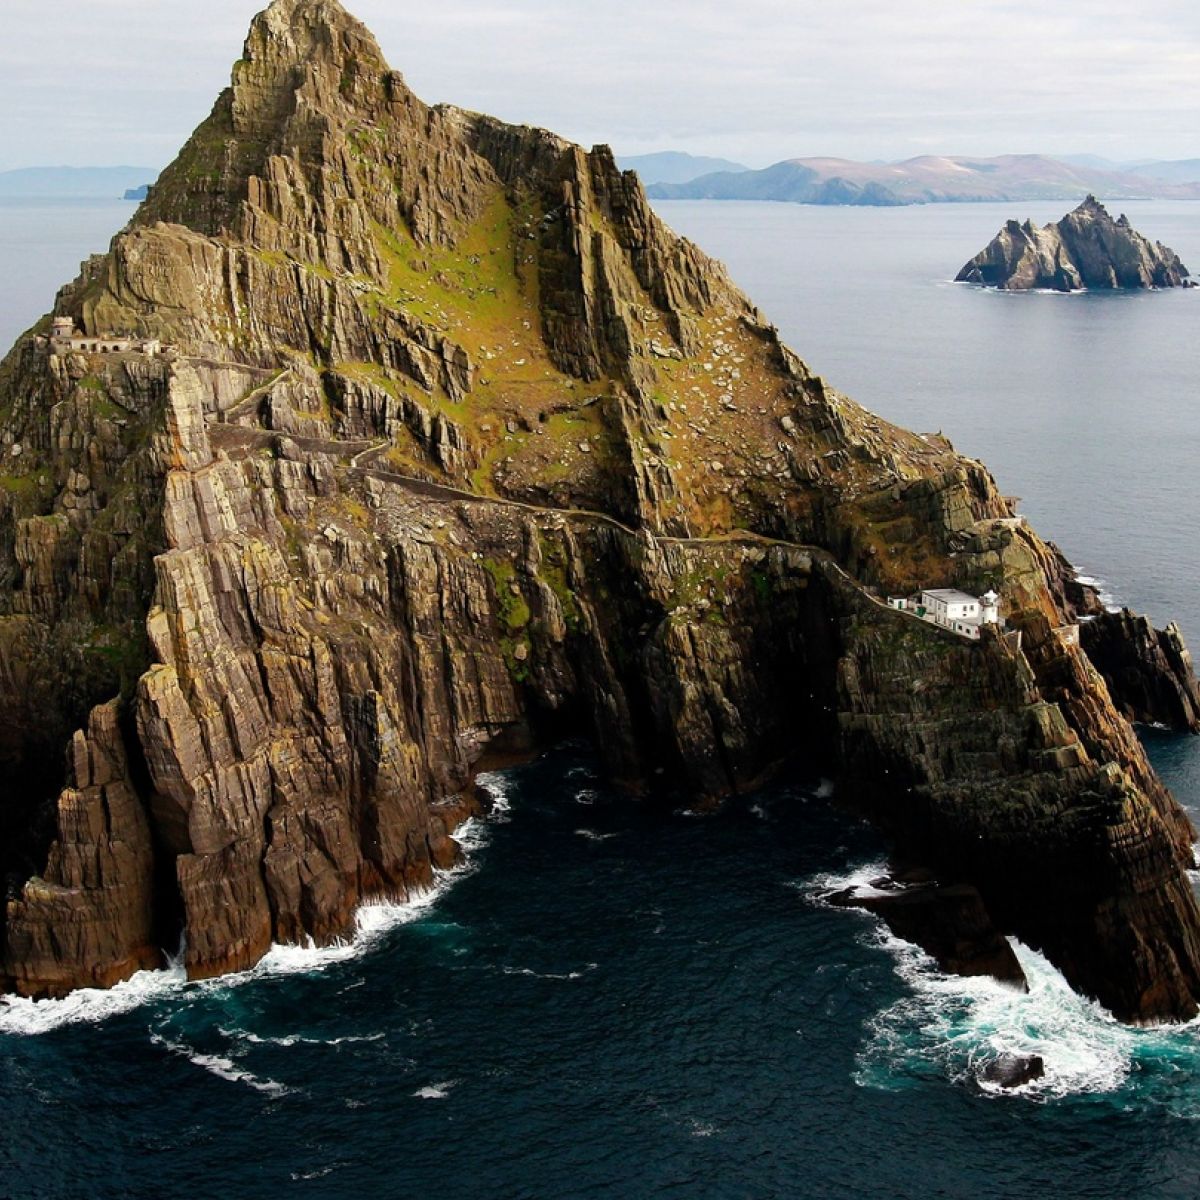 Star Wars Not To Blame For Skellig Michael Rockfall Says Expert